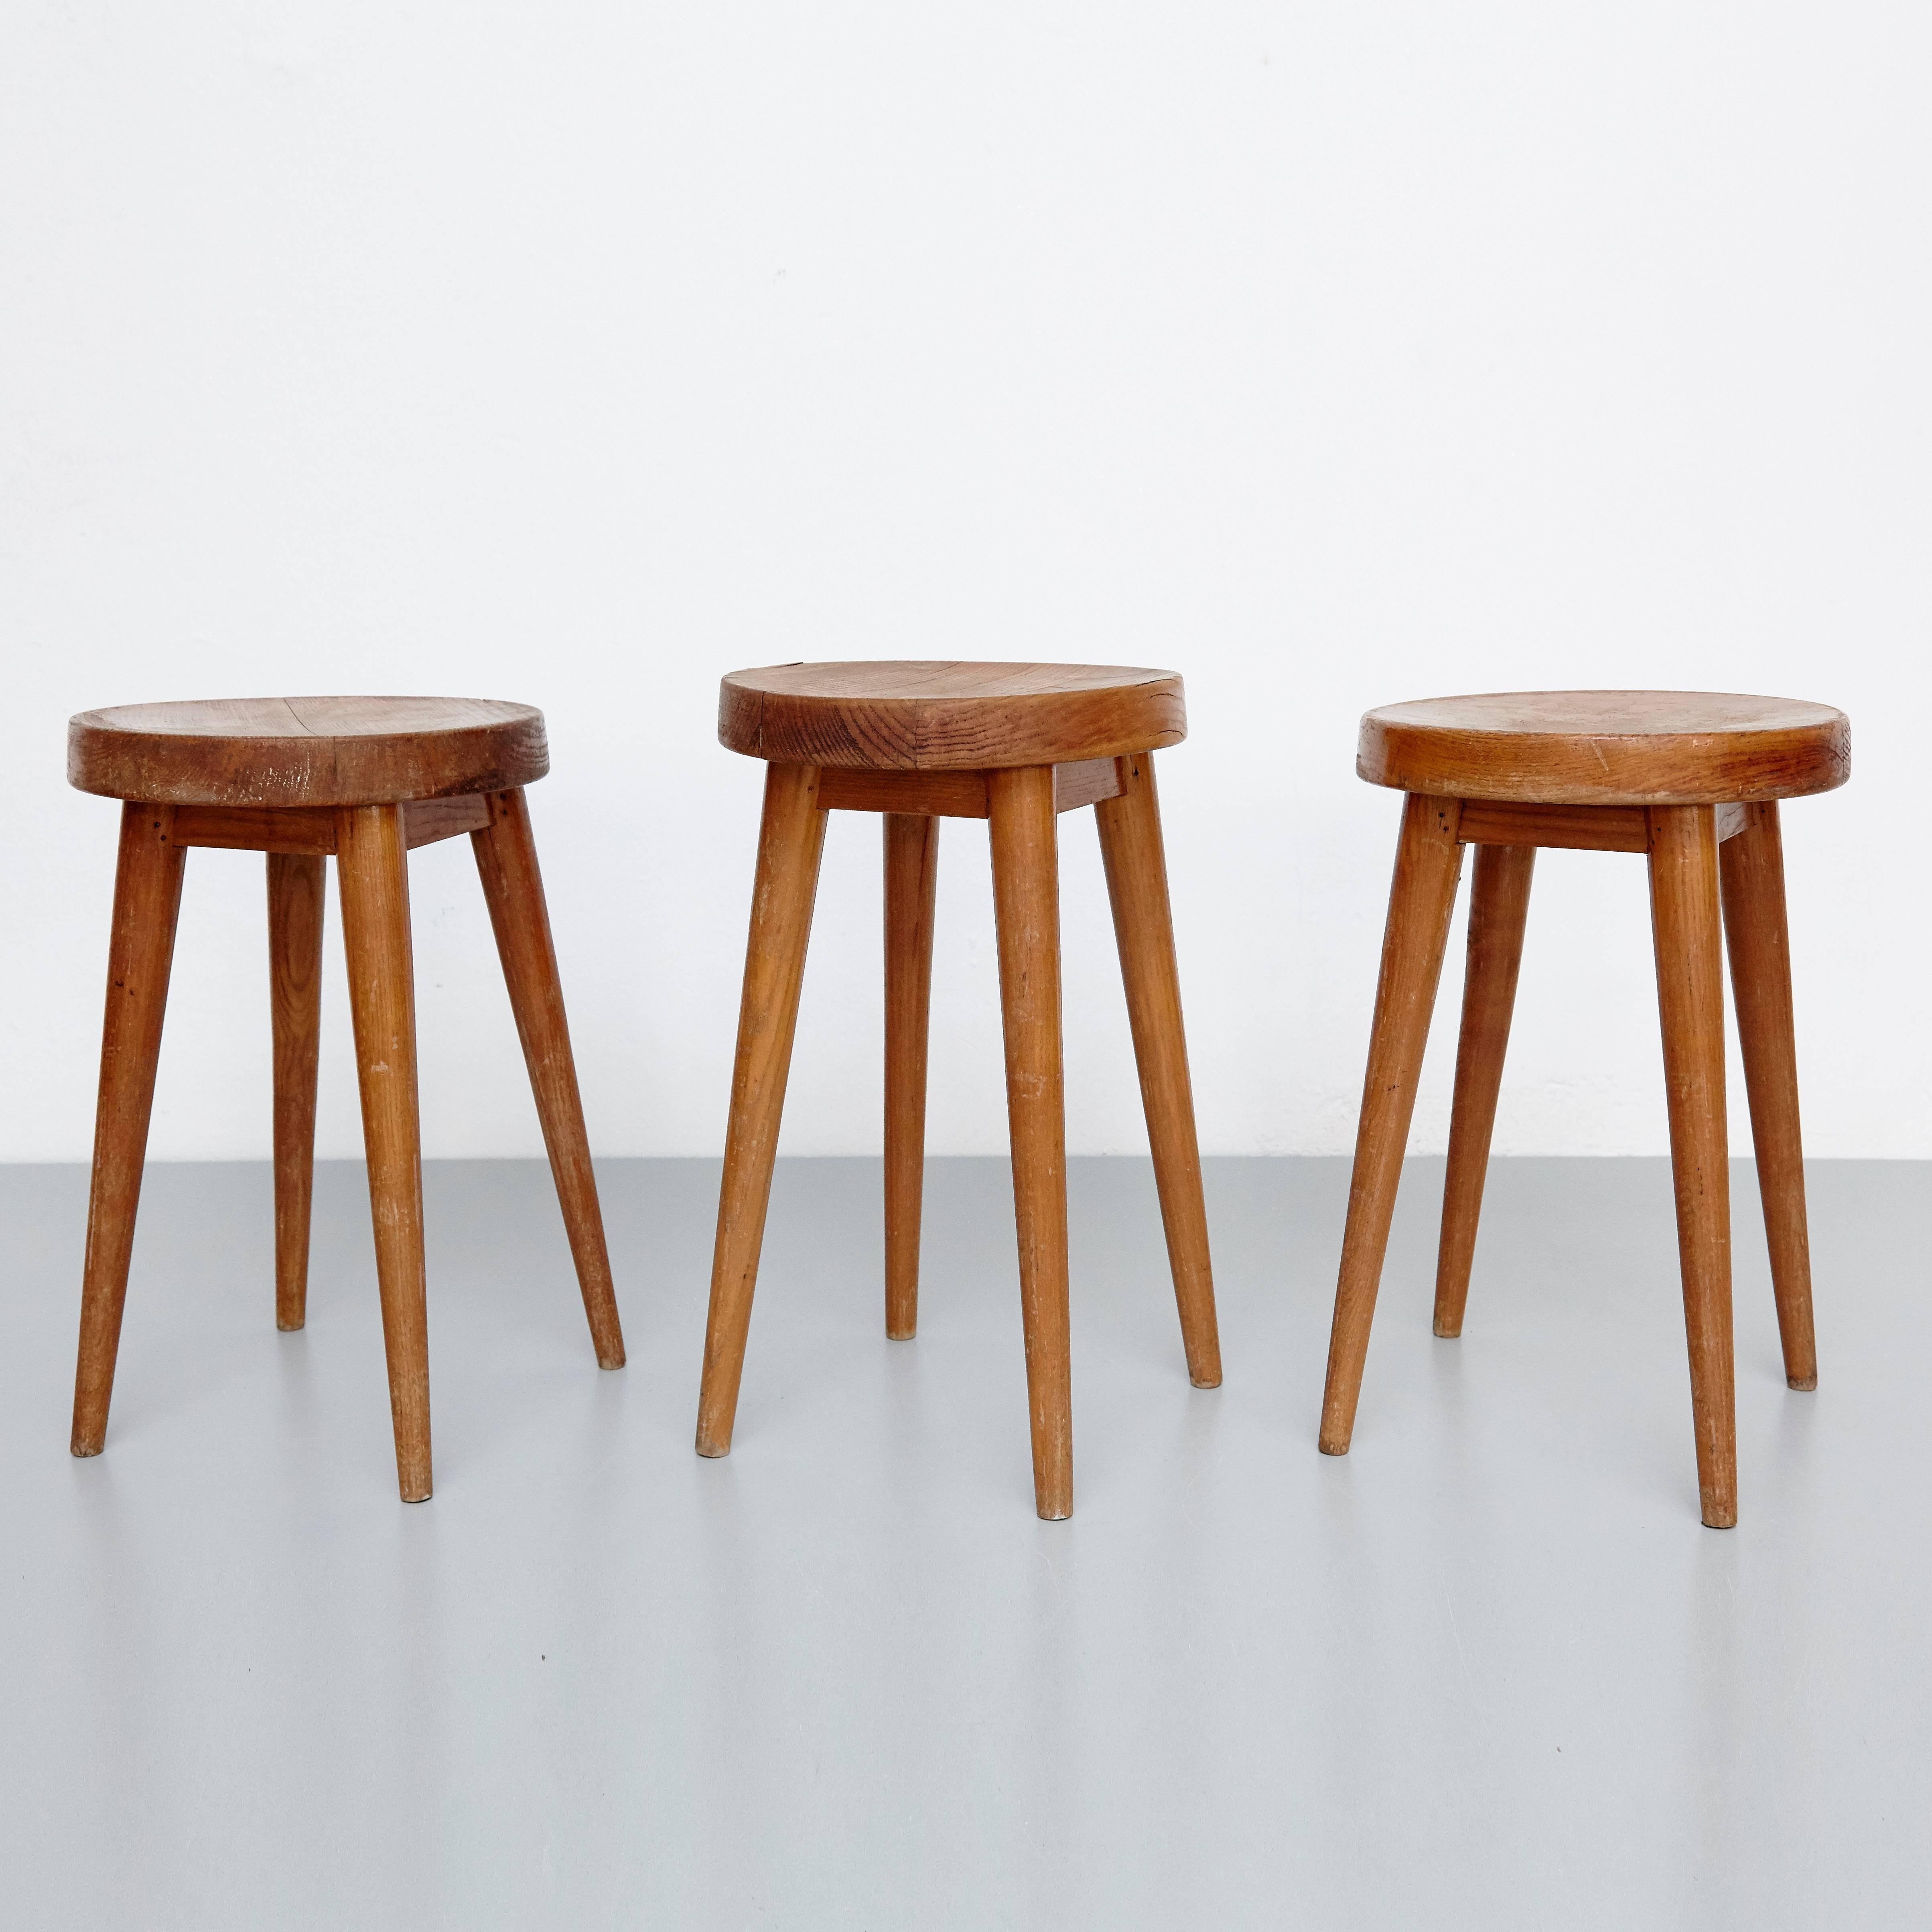 Pierre Jeanneret & Charlotte Perriand Stool 2